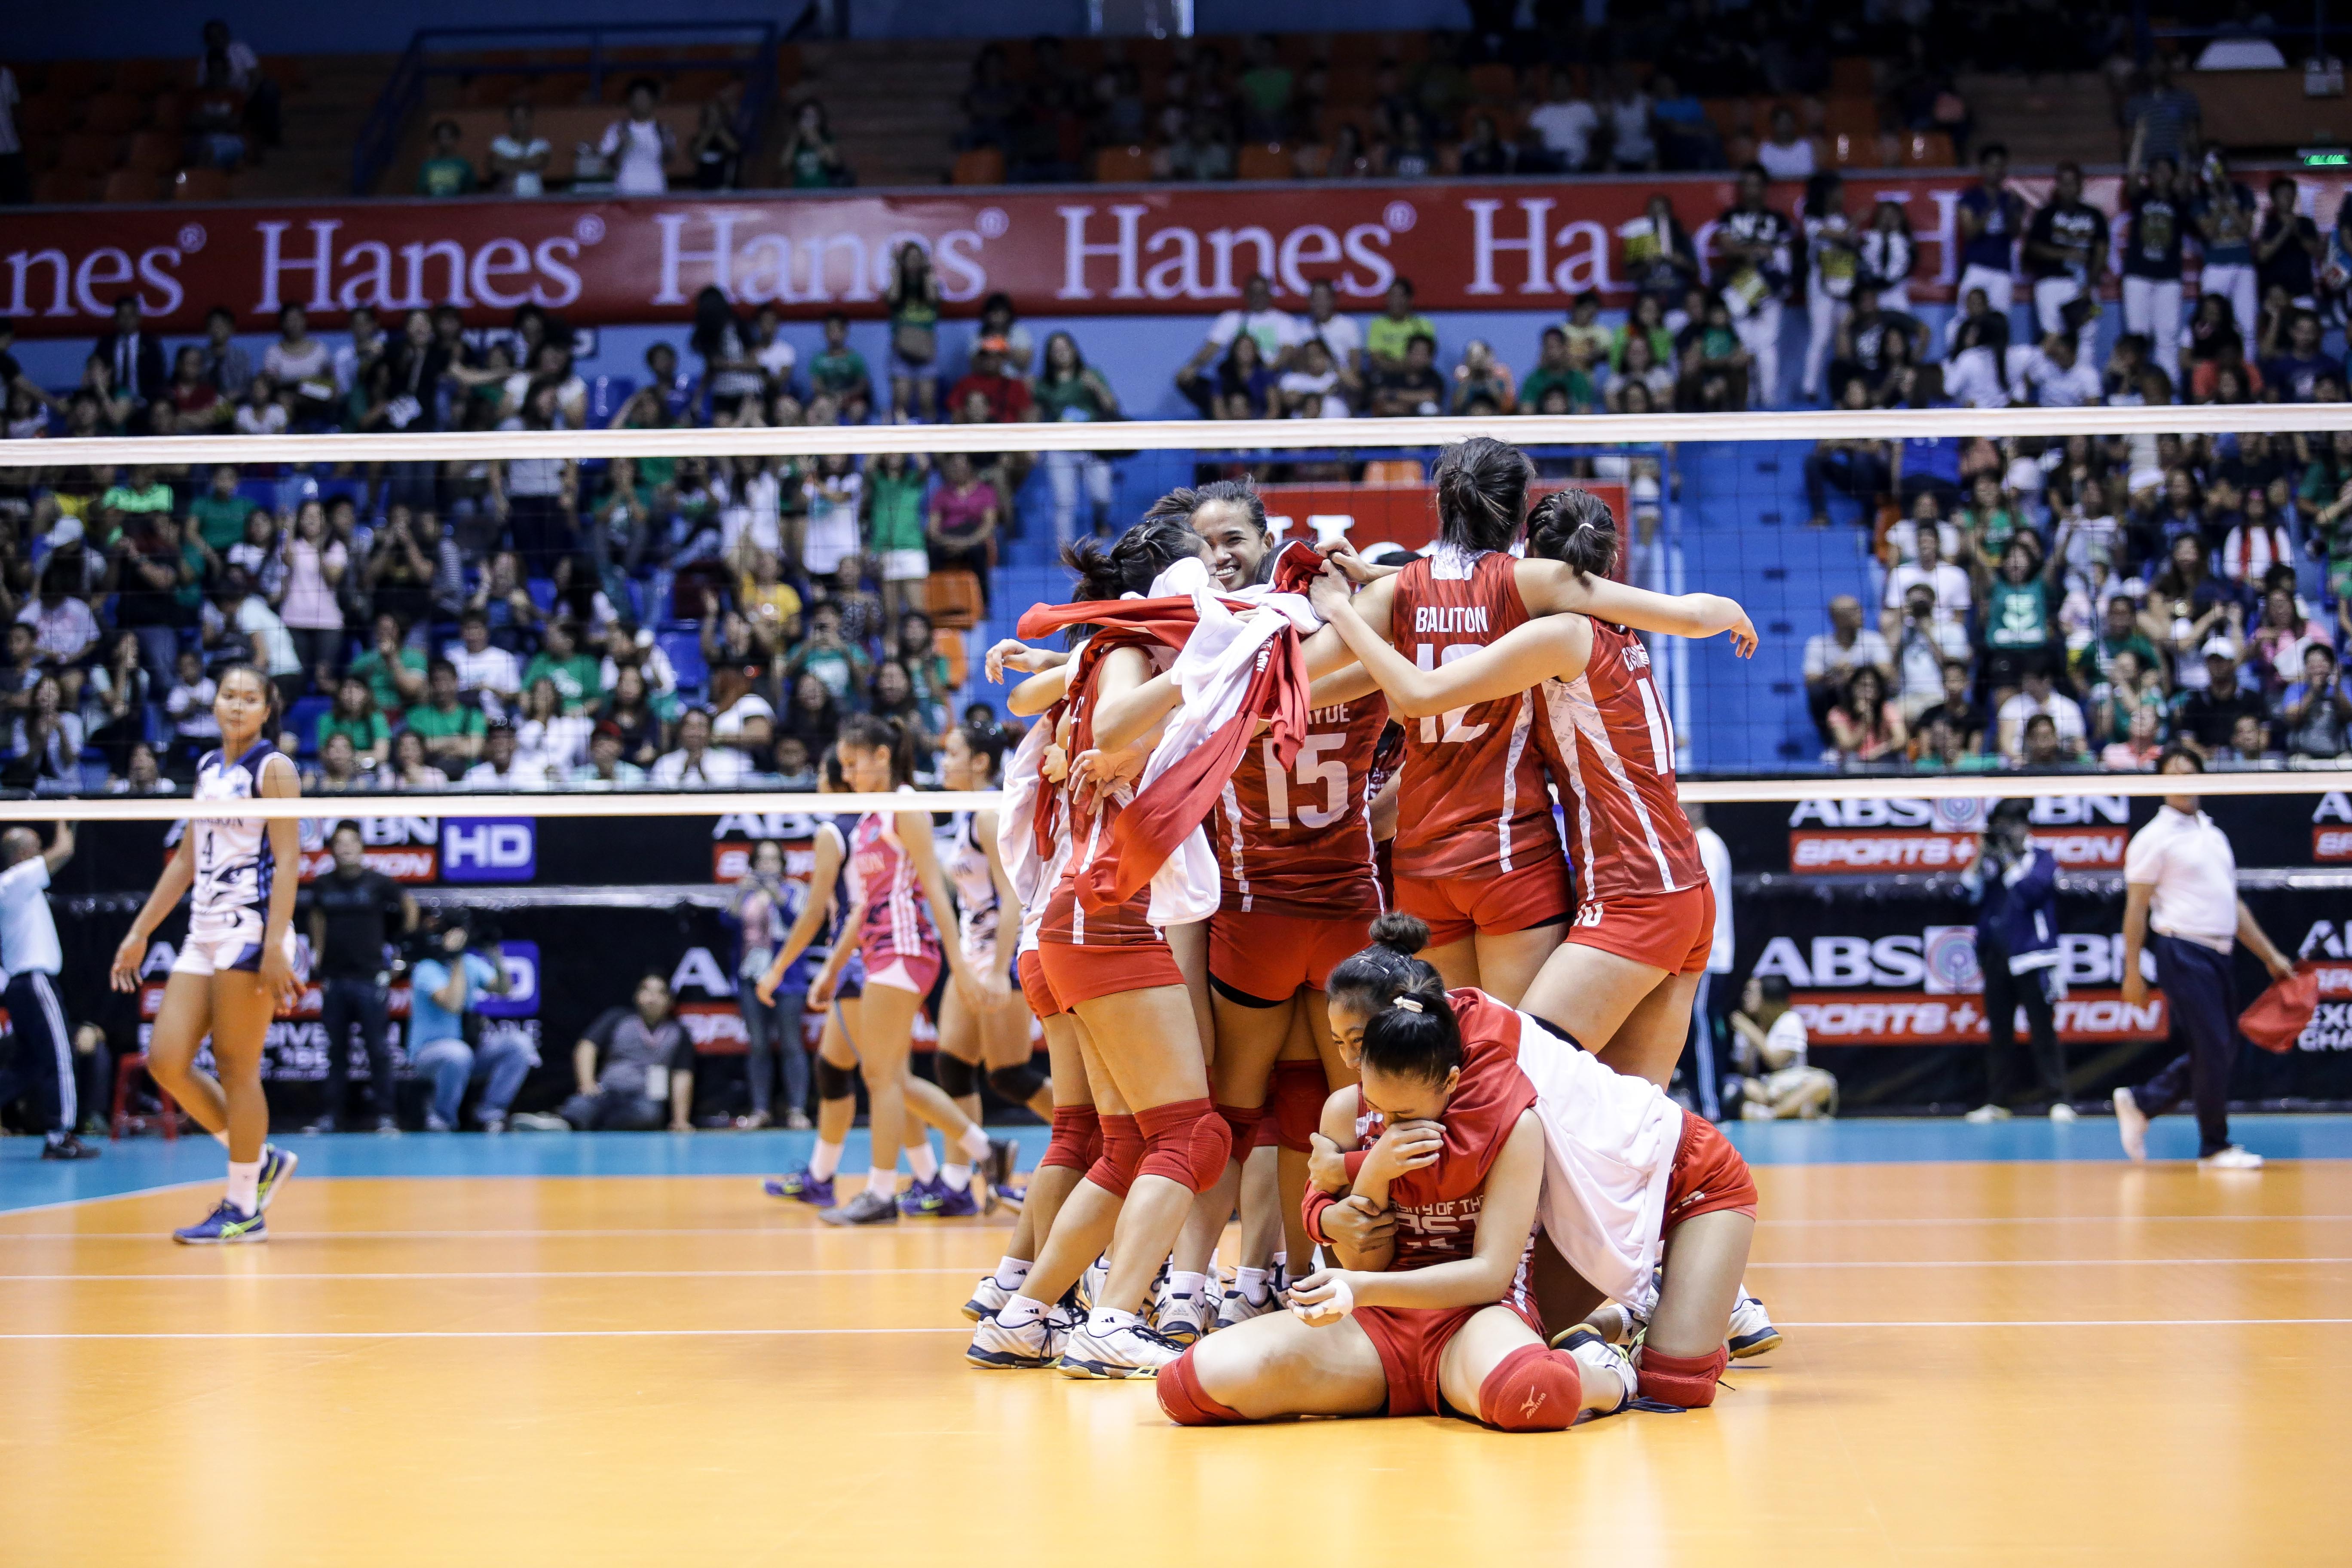 UE Lady Warriors. Photo by Tristan Tamayo/INQUIRER.net